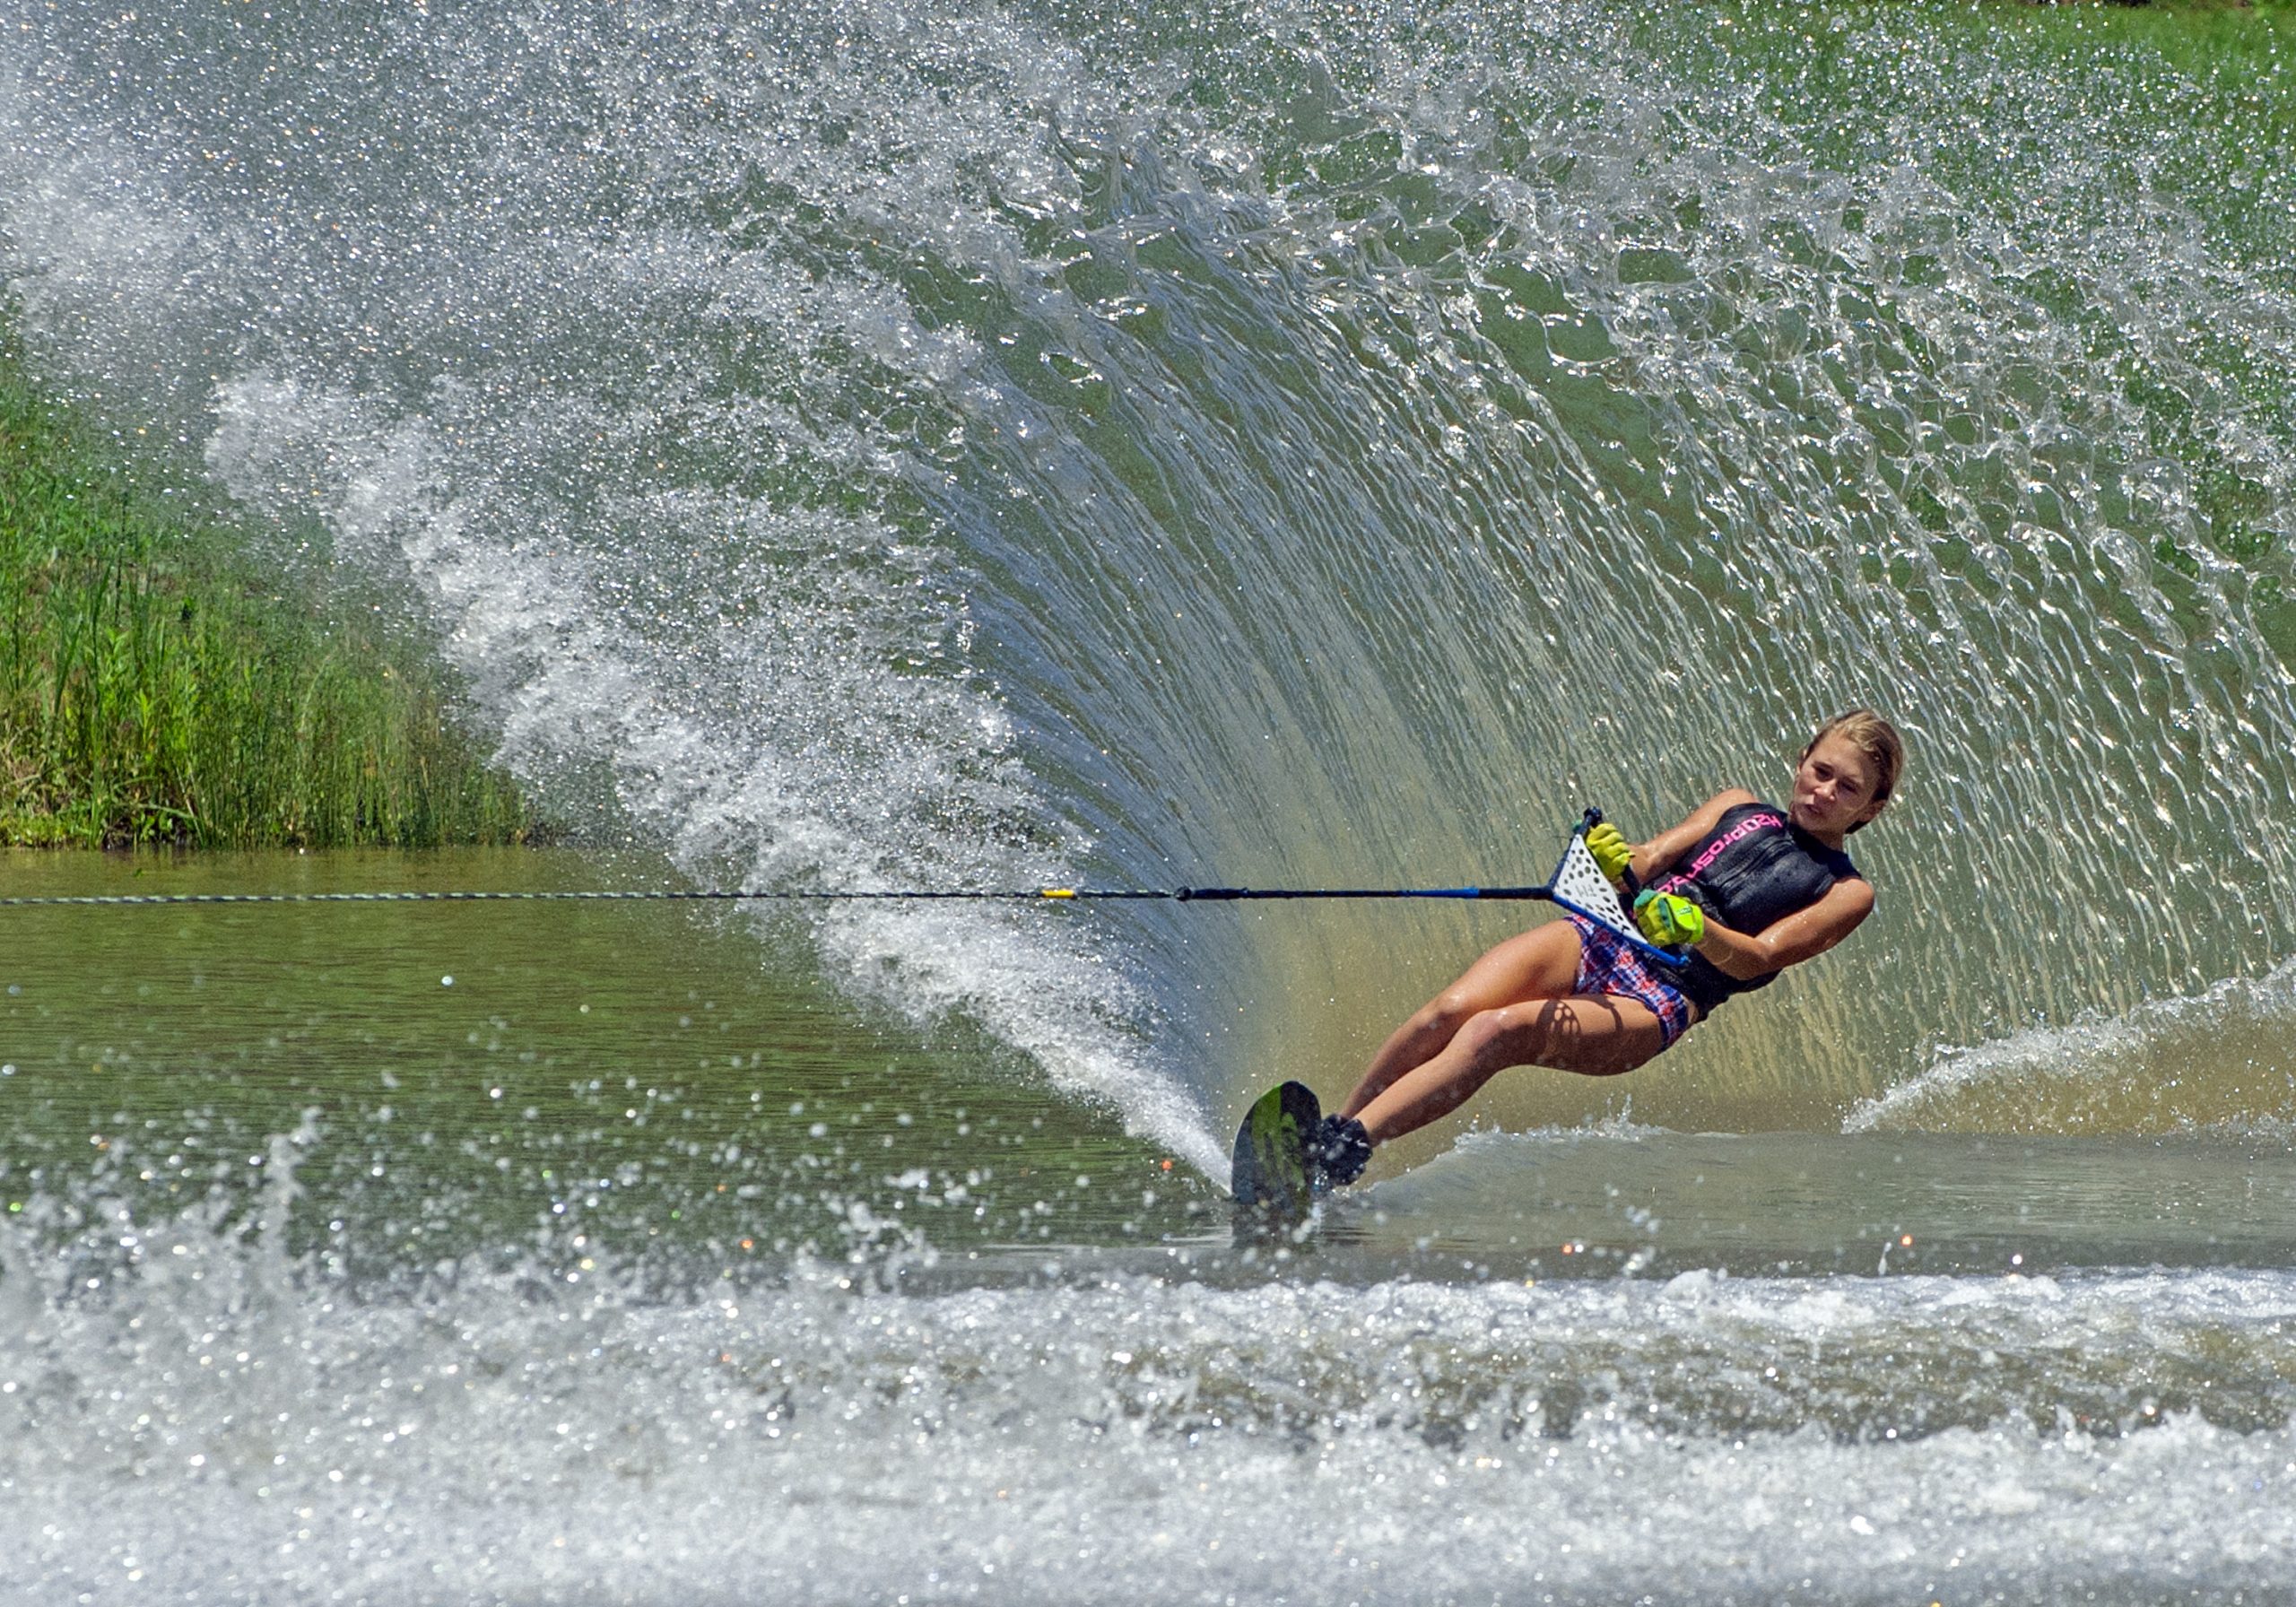 Natalie Pfister was one of three skiers from South Carolina to be invited to join the American Water Ski Association’s Junior Development Program for the Southern Region. 